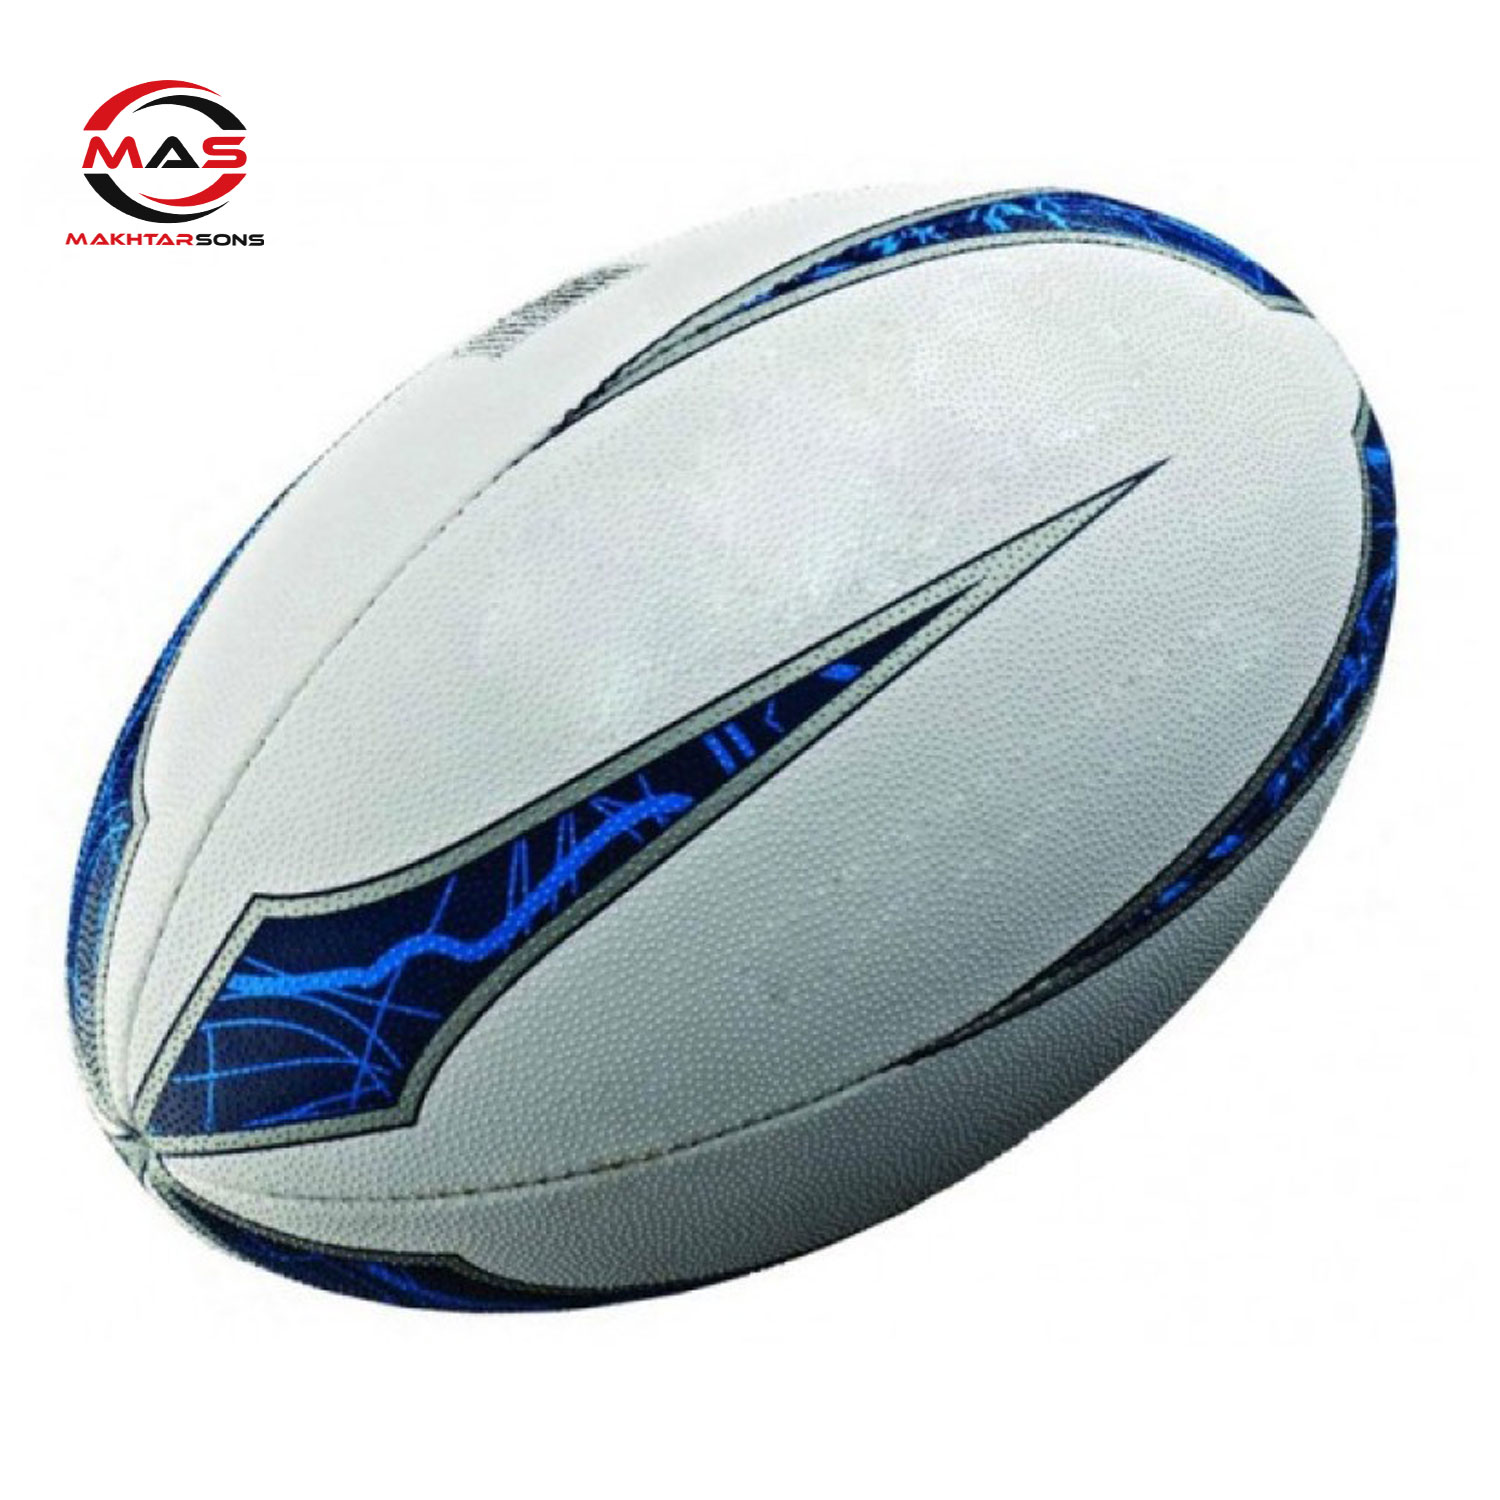 RUGBY BALL | MAS 426